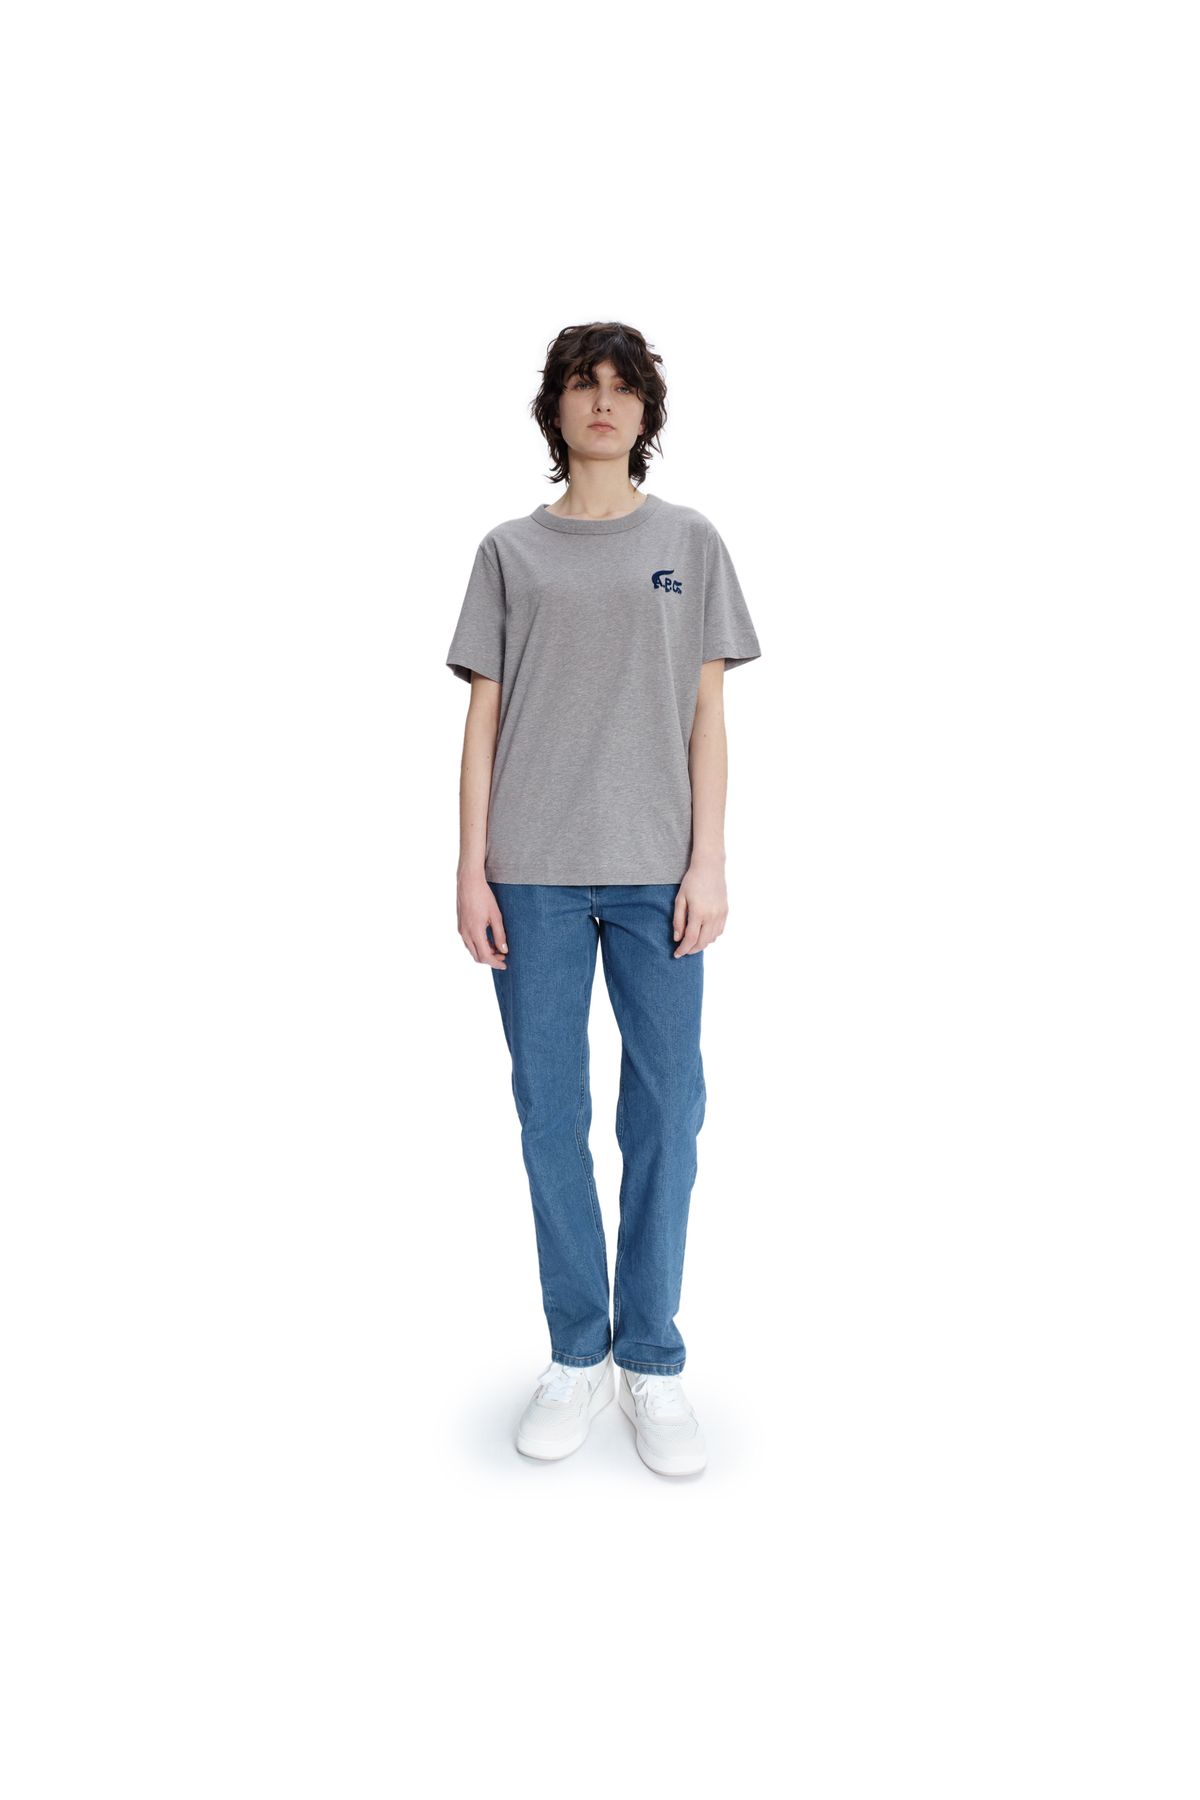 Lacoste X A.P.C Unisex Relaxed Fit Bisiklet Yaka Gri T-Shirt